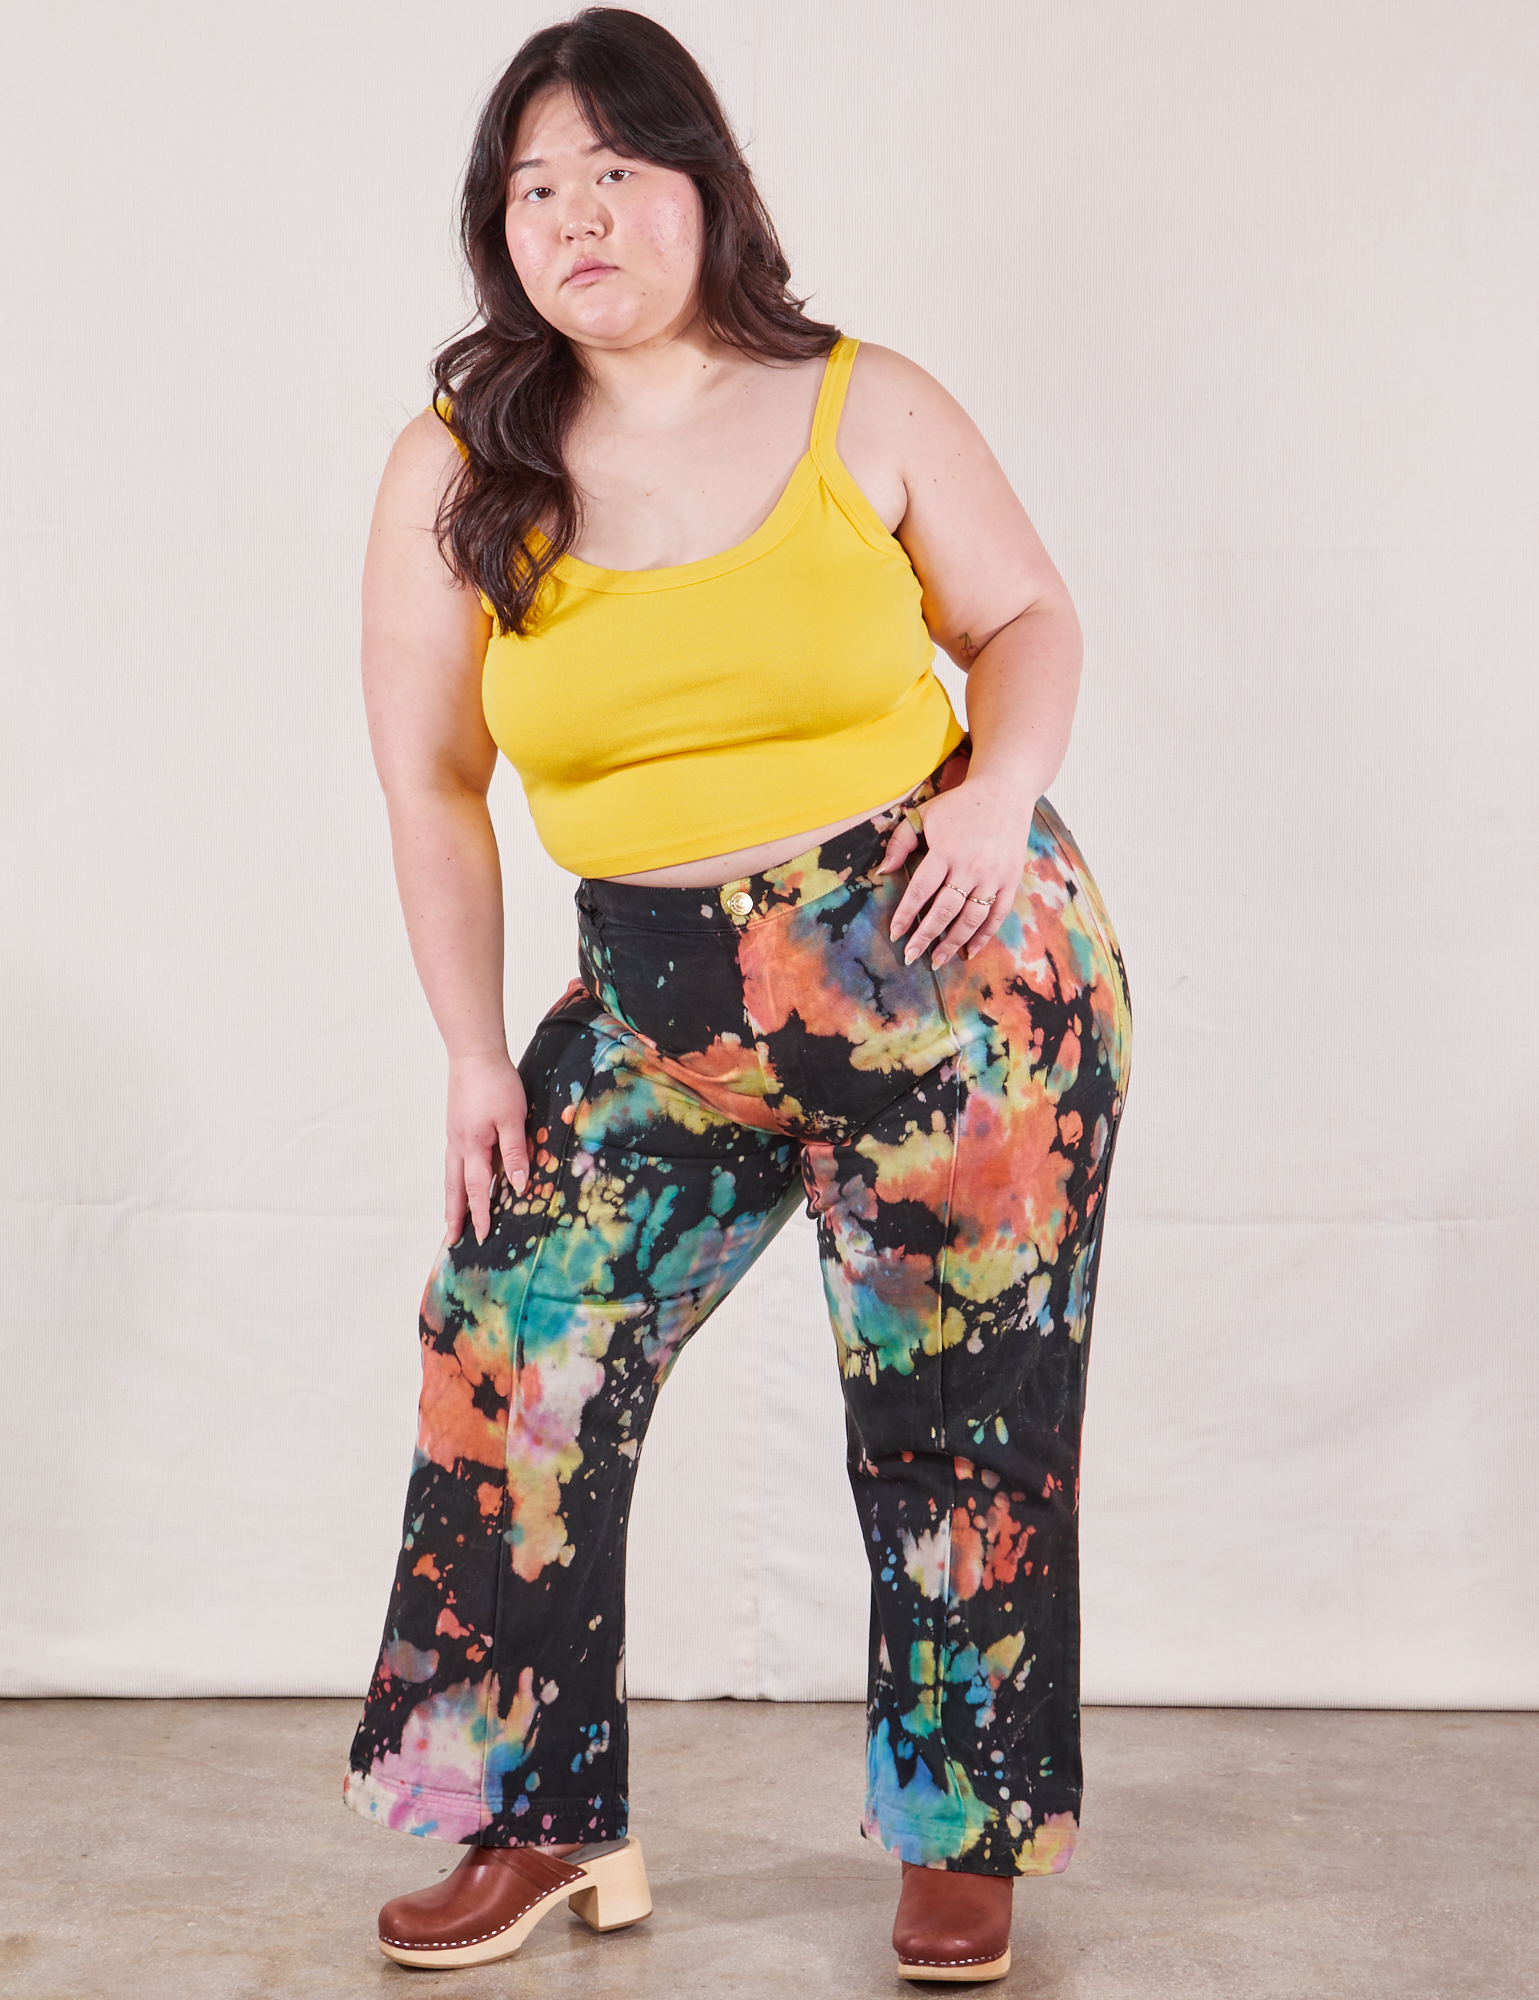 Ashley is 5'7" and wearing 1XL Western Pants in Rainbow Magic Waters paired with sunshine yellow Cami